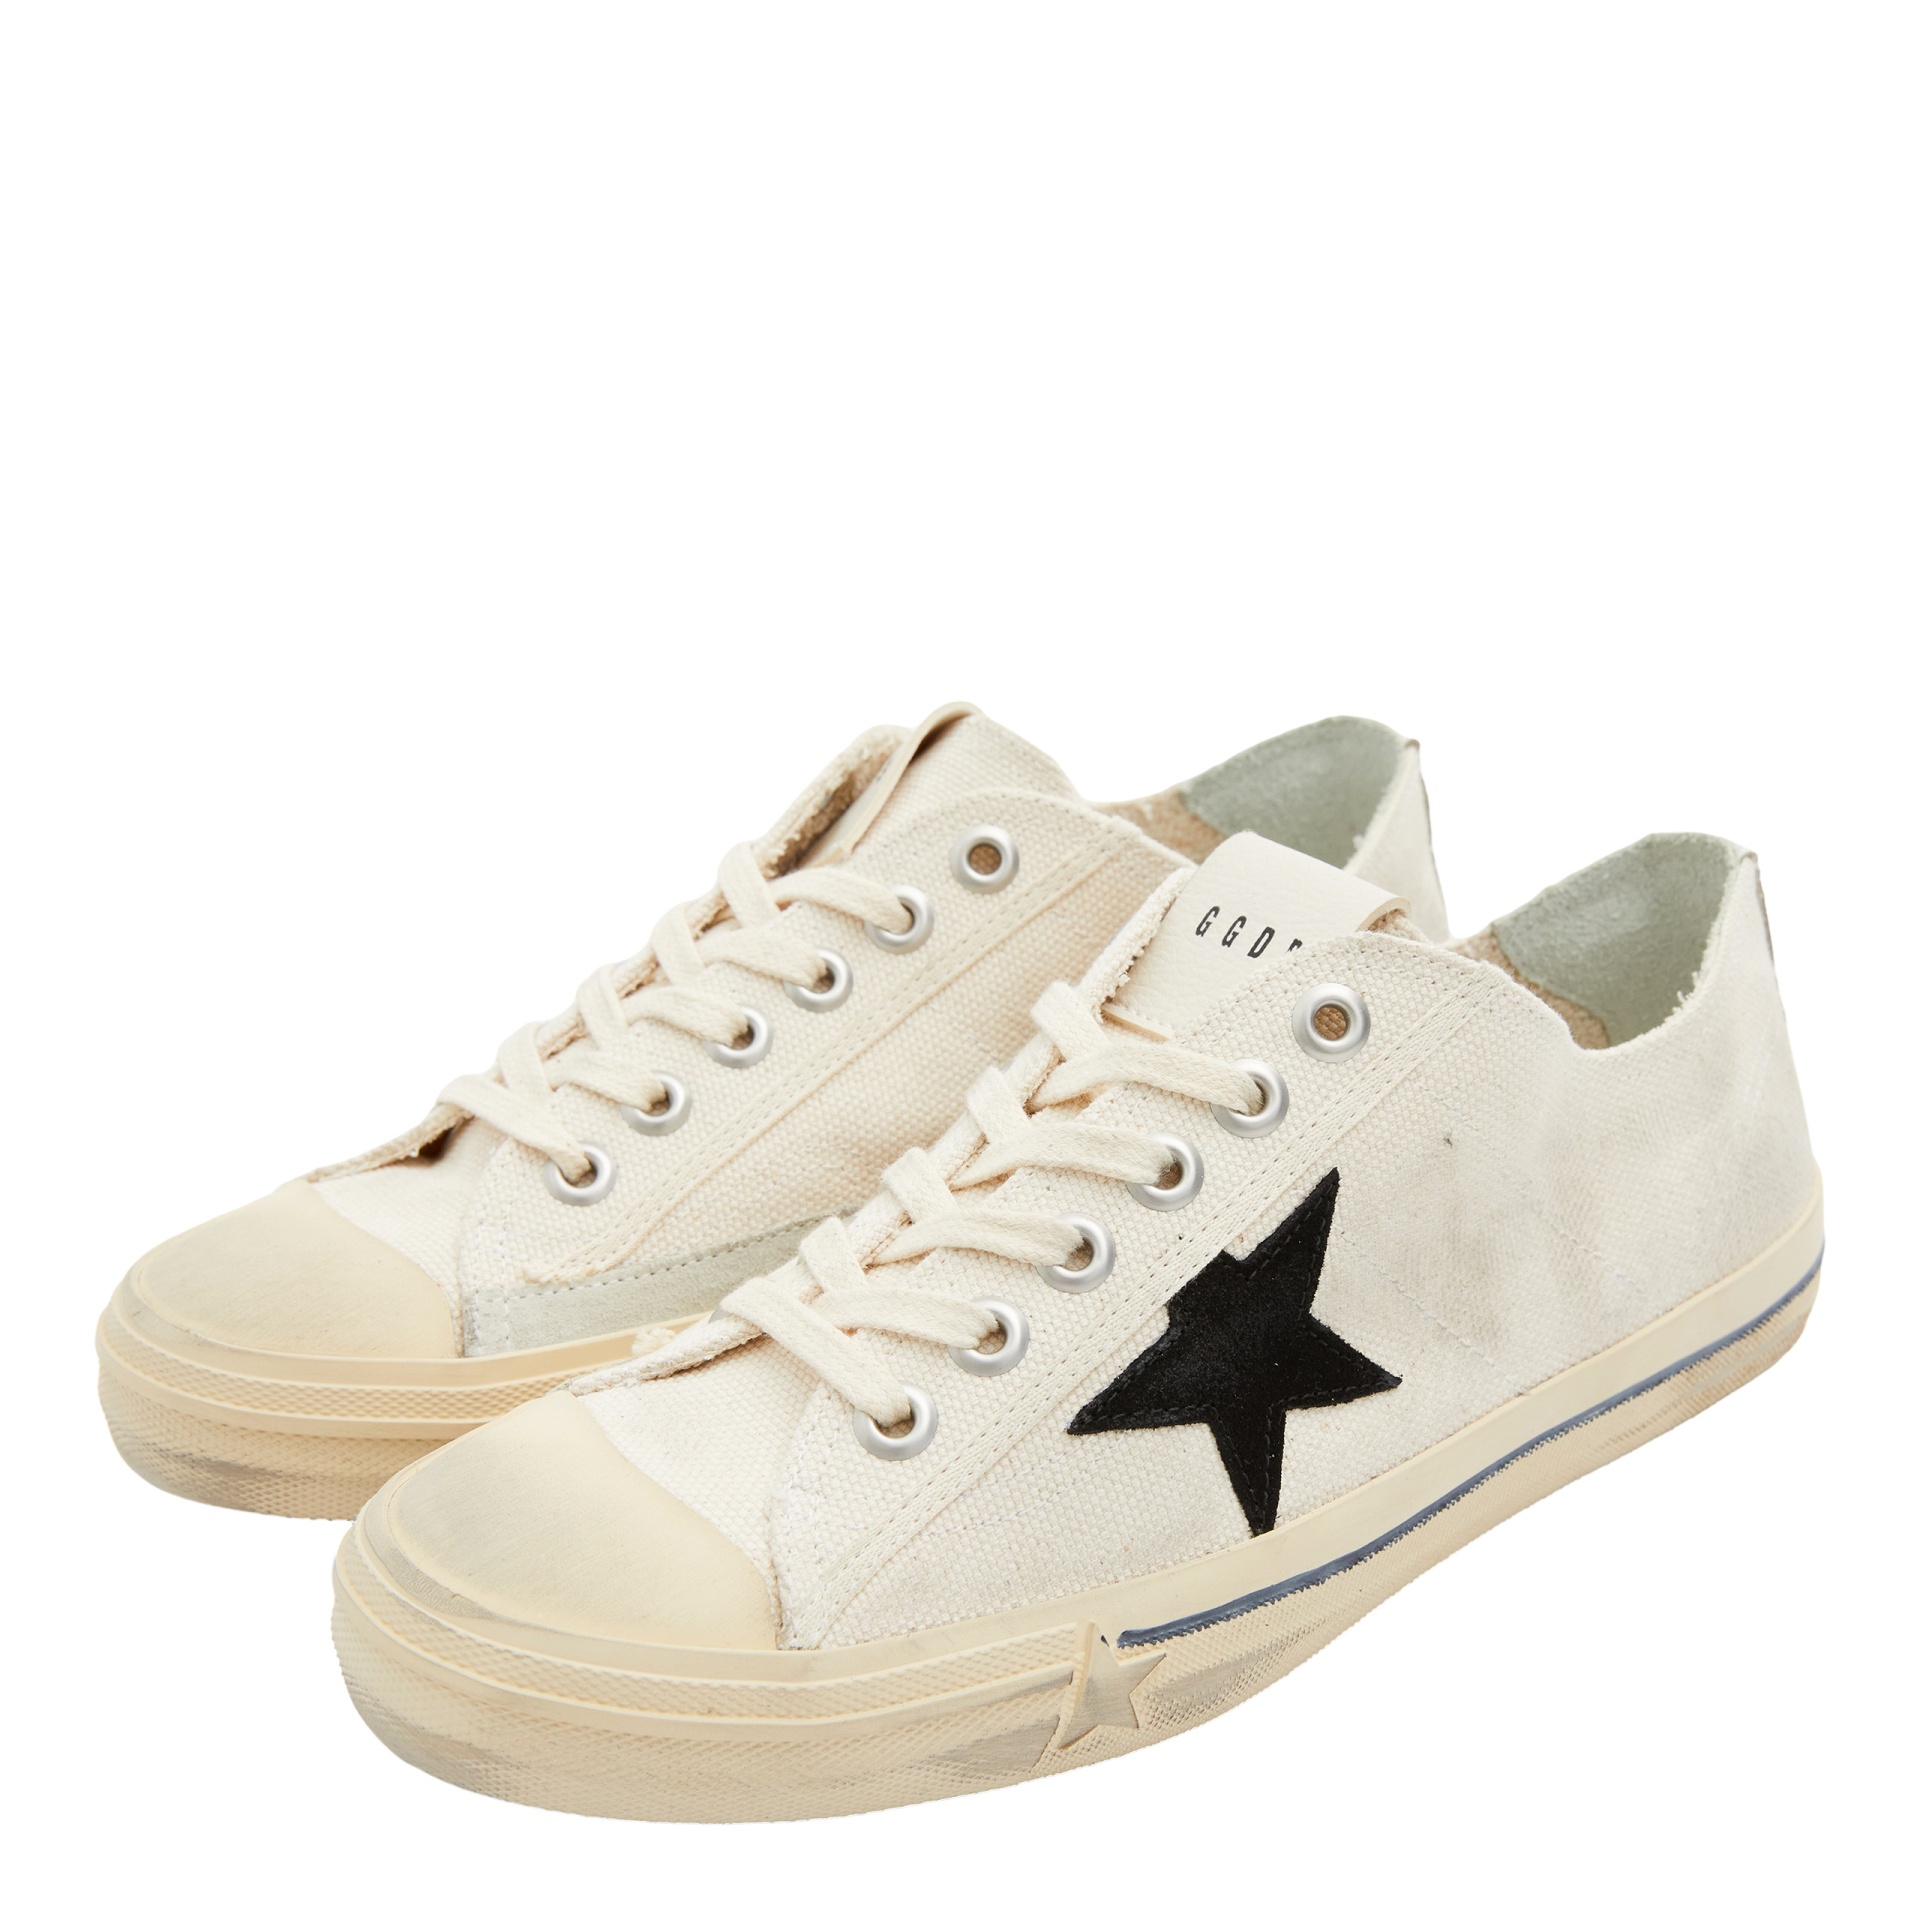 V-STAR CANVAS SNEAKERS - 1